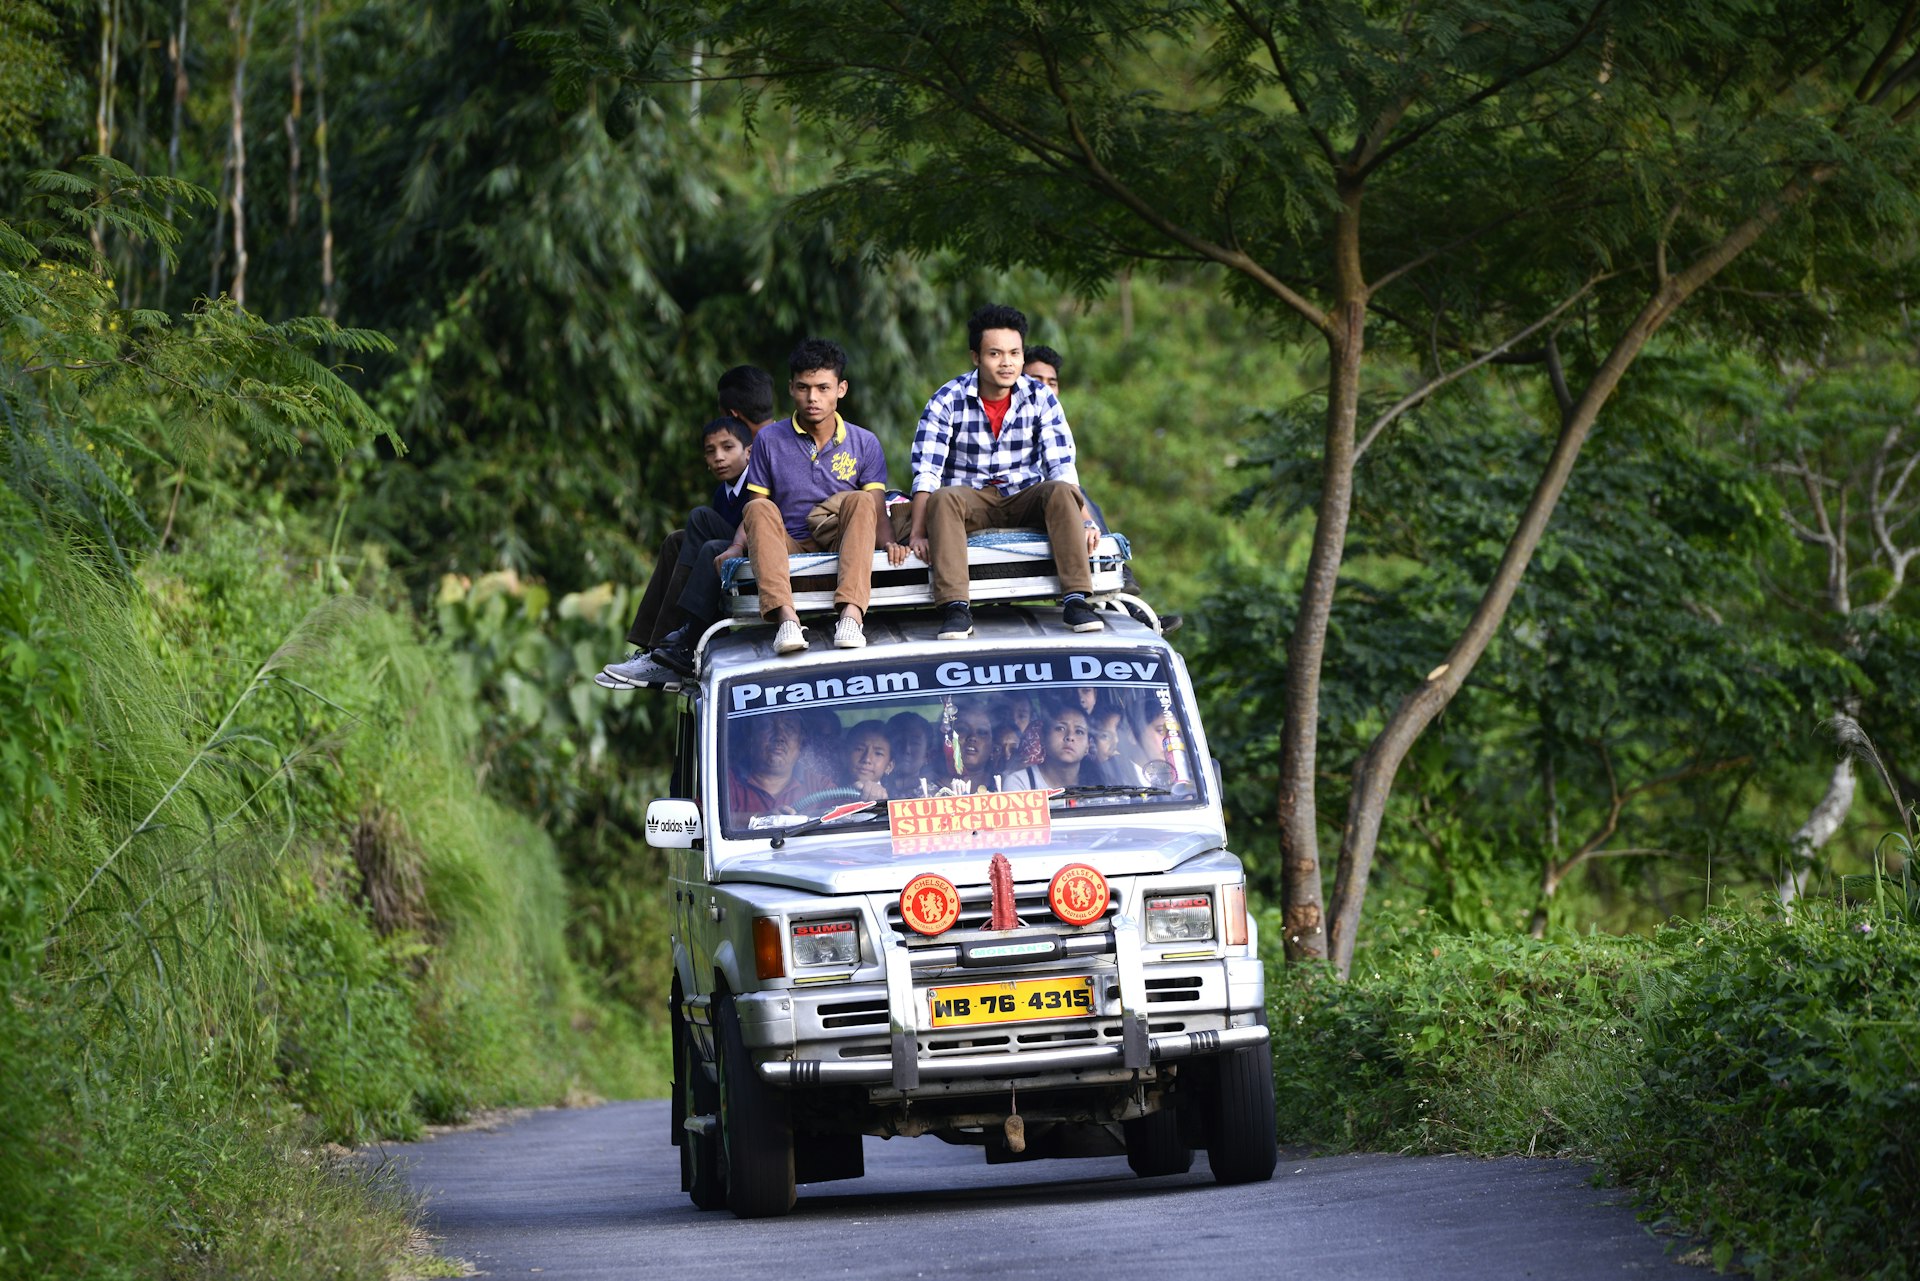 A shared taxi full of passengers on a small mountain road